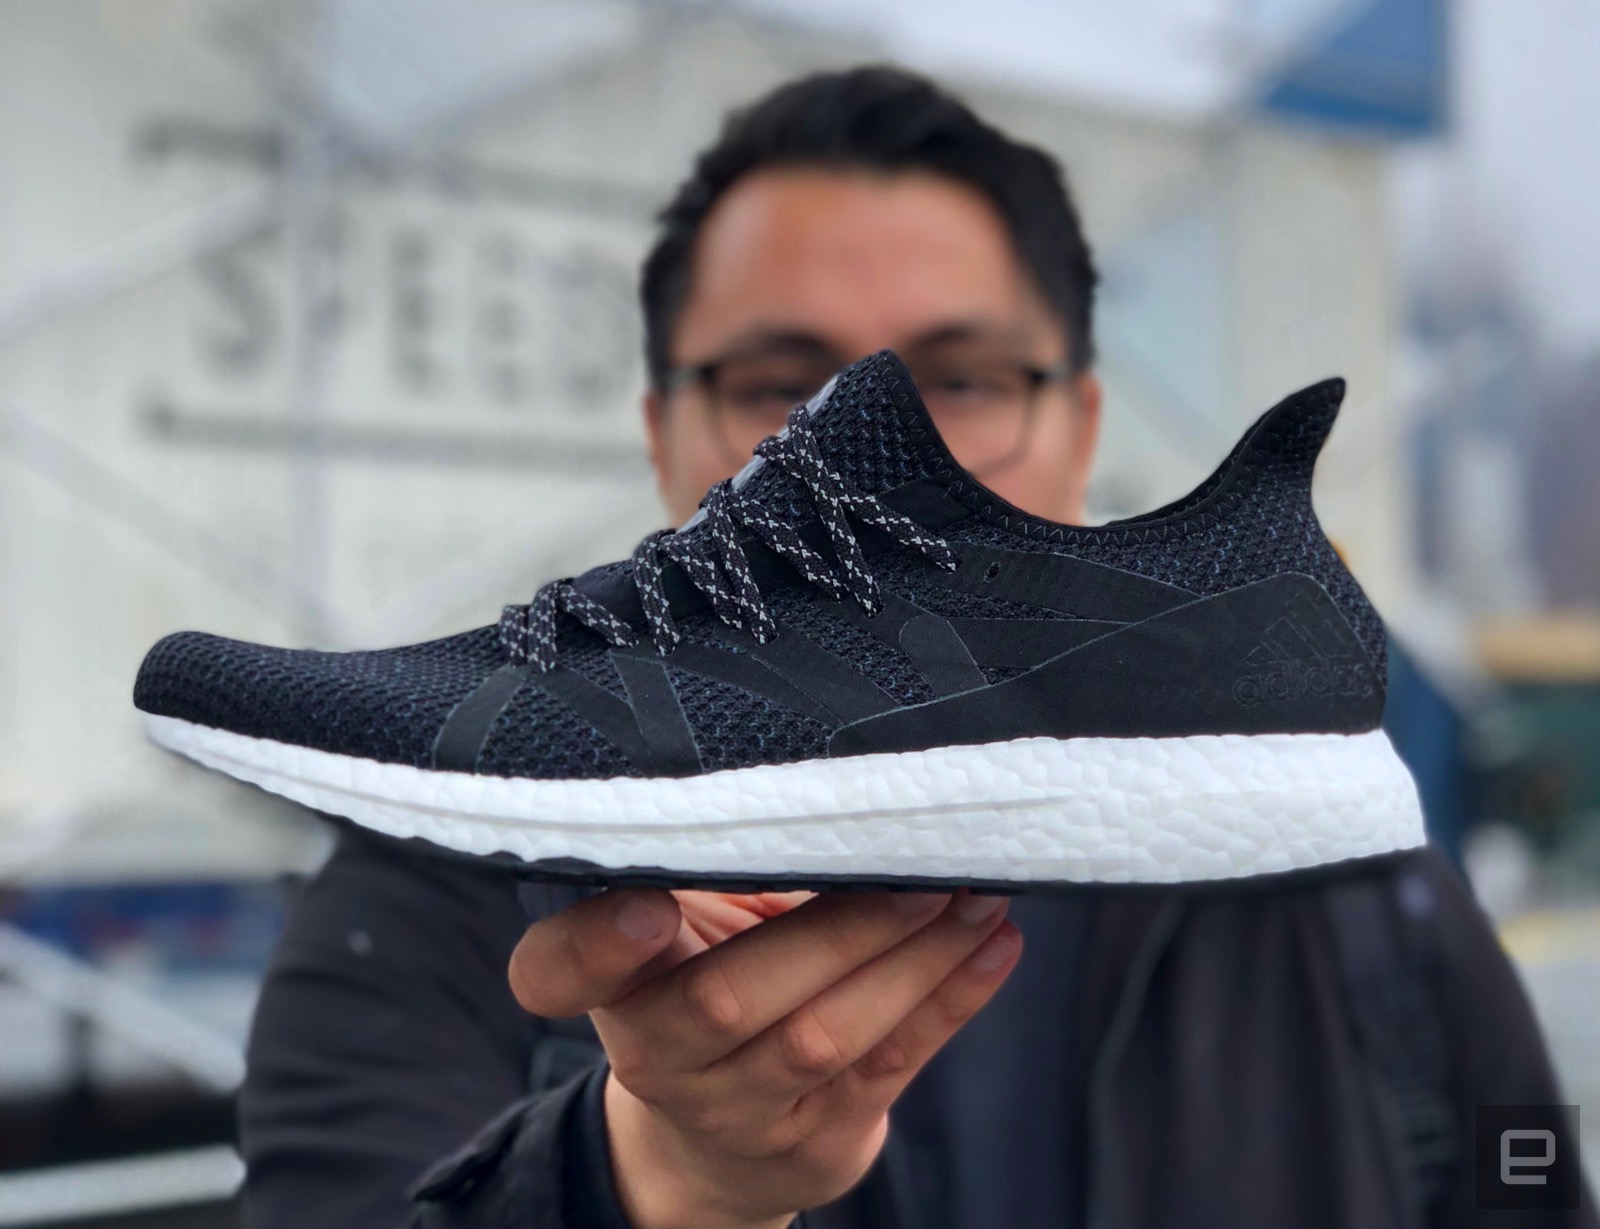 Adidas' NYC-inspired shoe was designed using data from runners Engadget